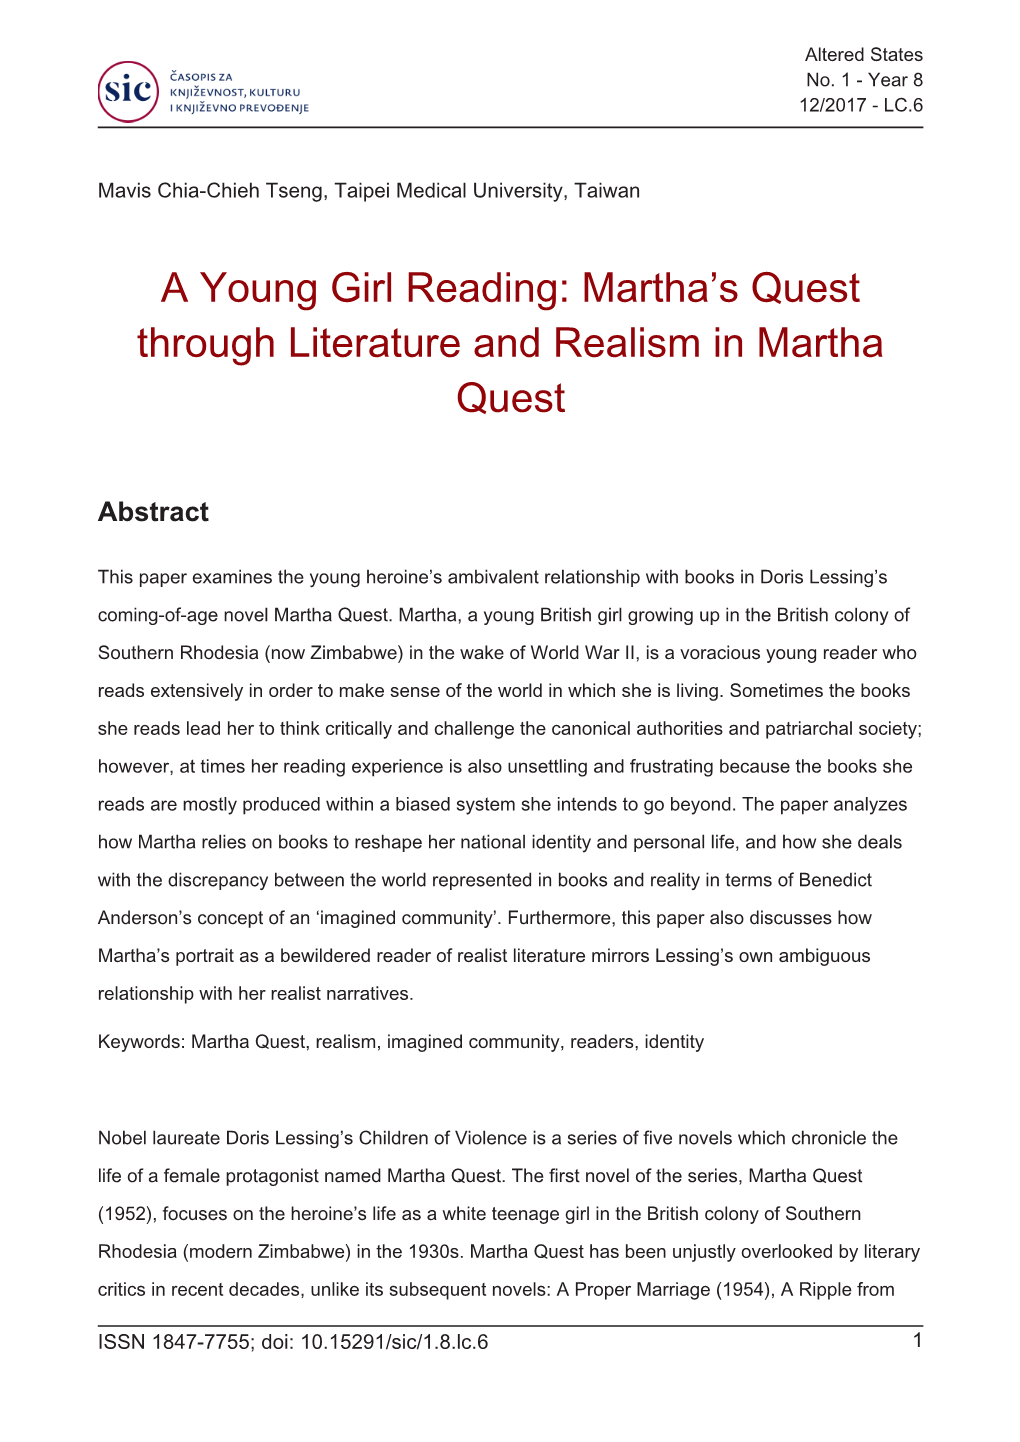 A Young Girl Reading: Martha's Quest Through Literature and Realism in Martha Quest